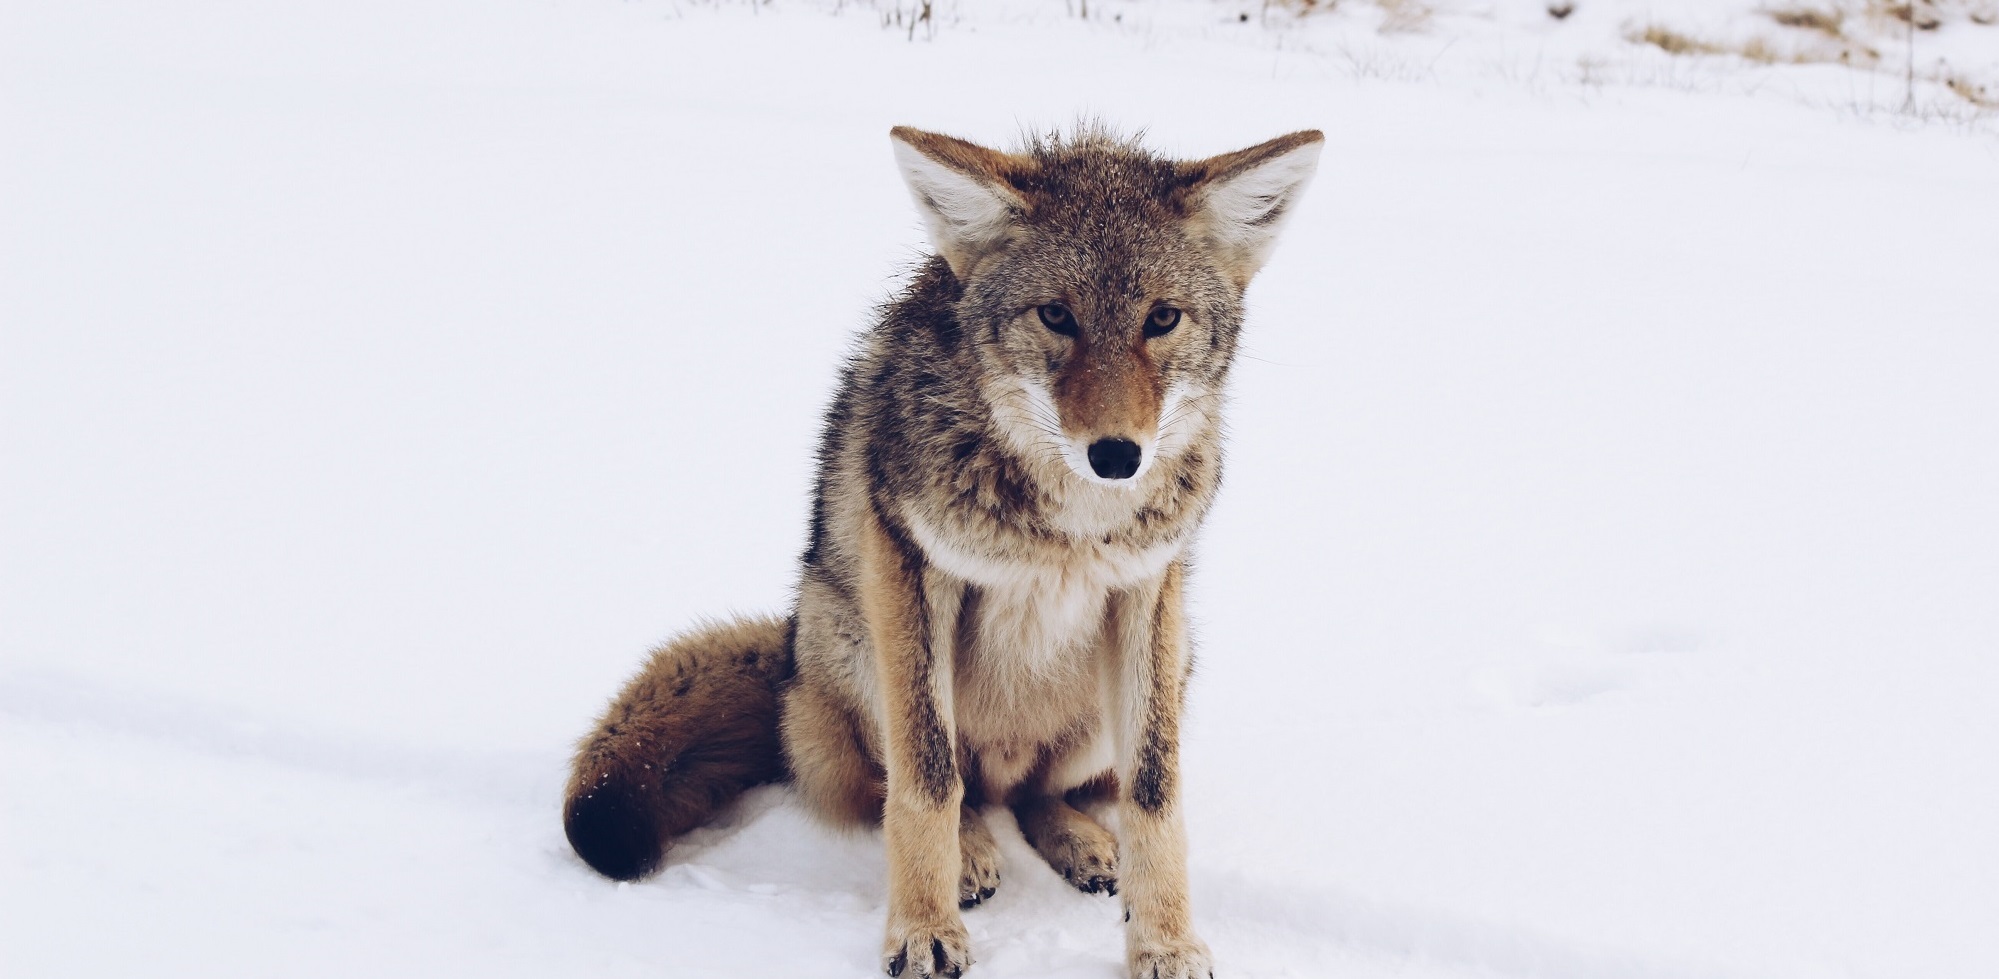 Image shows coyote in snow